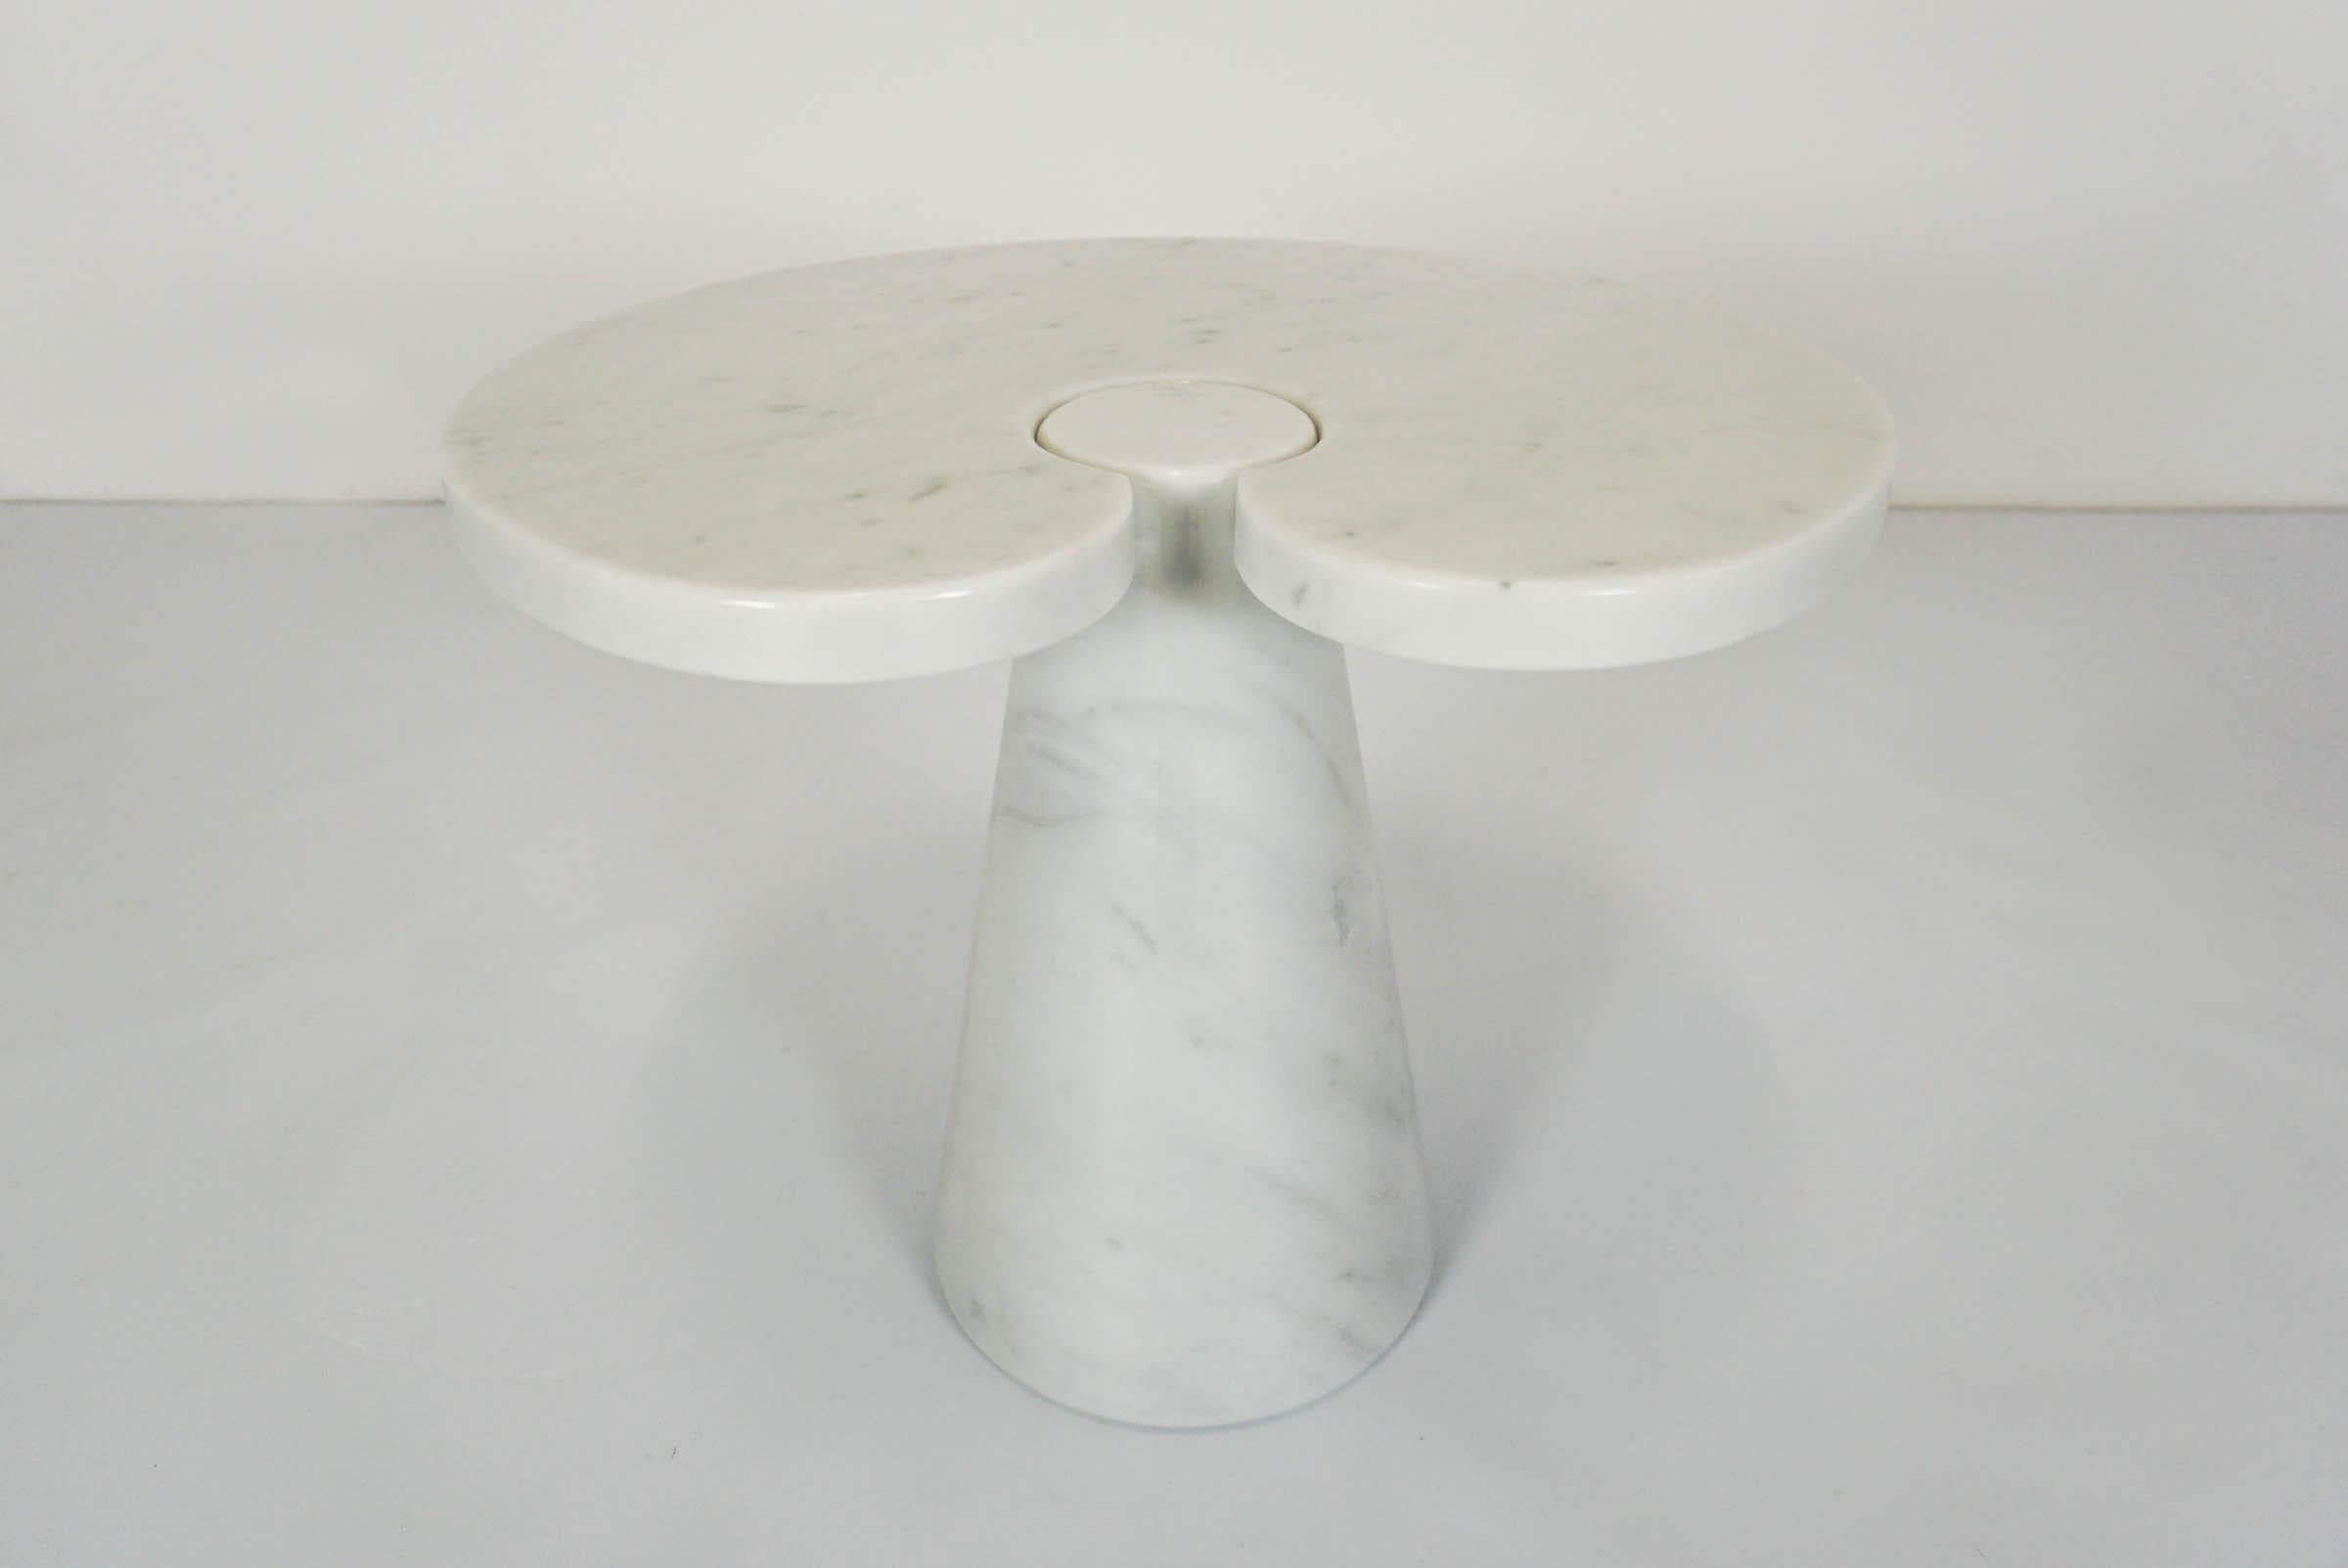 Very nice and sexy side table in white Carrara marble
Possibility of a second one in taller size.